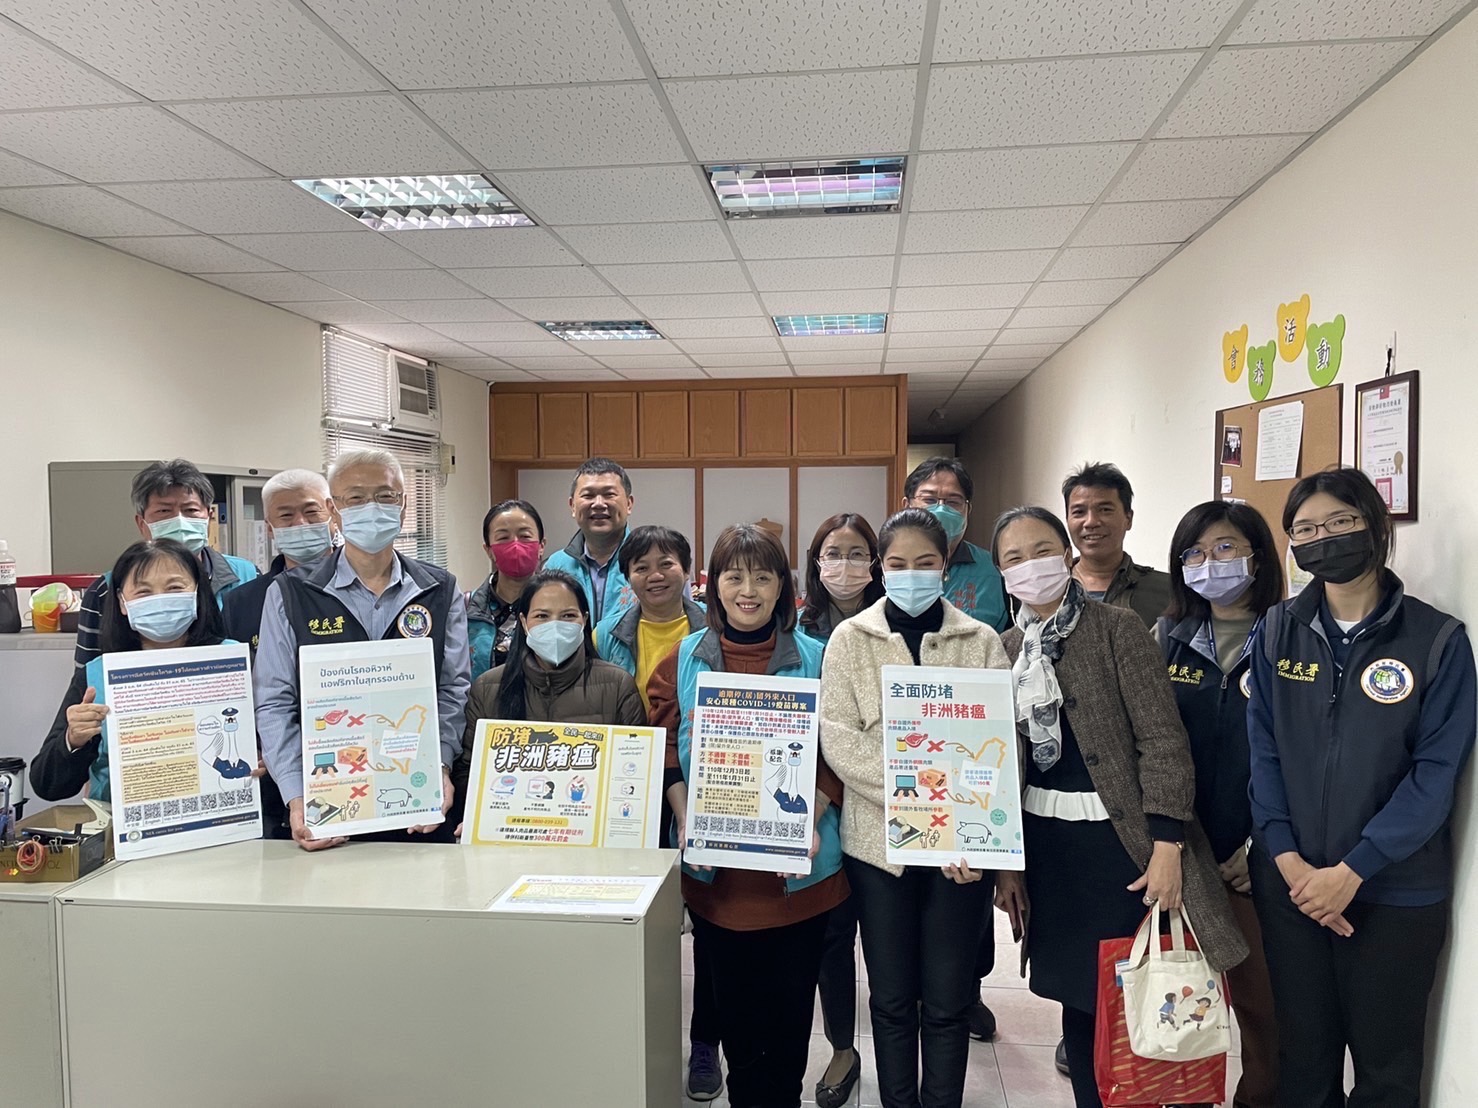 Kaohsiung Brigade, Thailand Trade and Economic Office, and KESIA promote “Carefree Covid-19 Vaccination Program” & “Prevention of African swine fever”. (Photo / Provided by Kaohsiung Brigade)